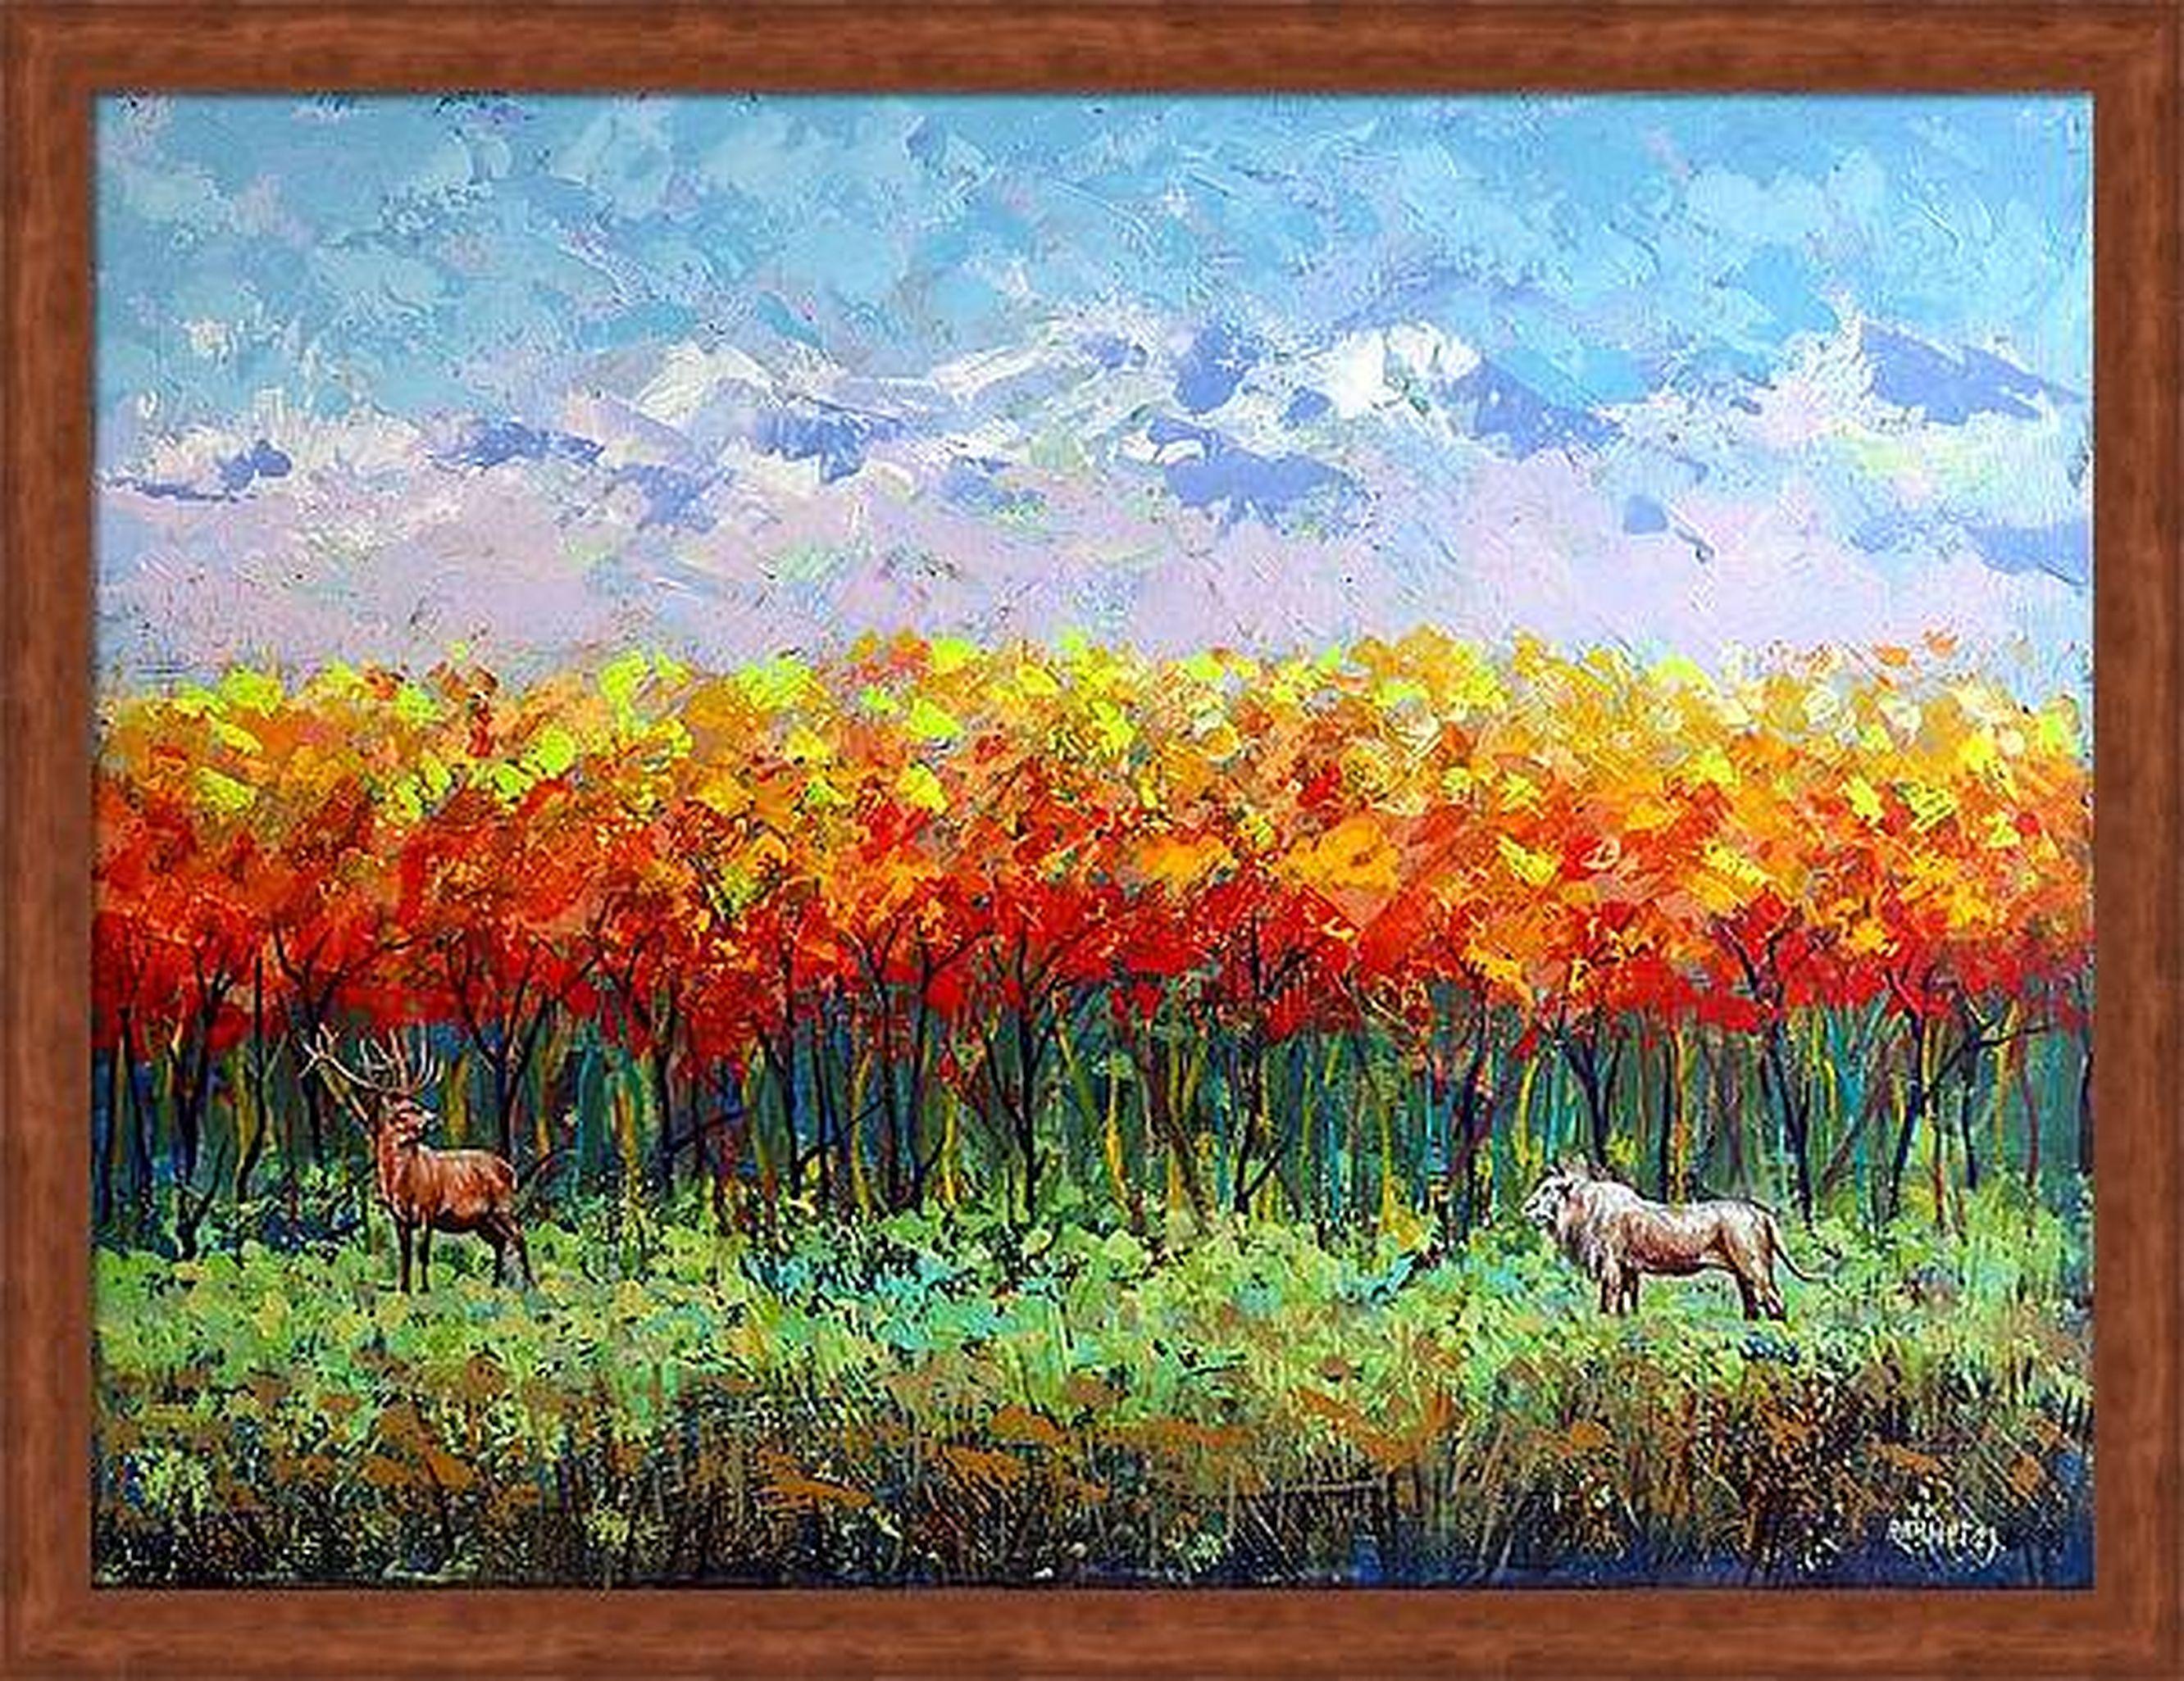 In this vibrant fusion of acrylics and oils, I sought to capture the essence of nature's raw beauty and the serenity of creatures in their habitat. My brushstrokes blend impressionistic fervor with surrealistic nuances, invoking a dream-like state